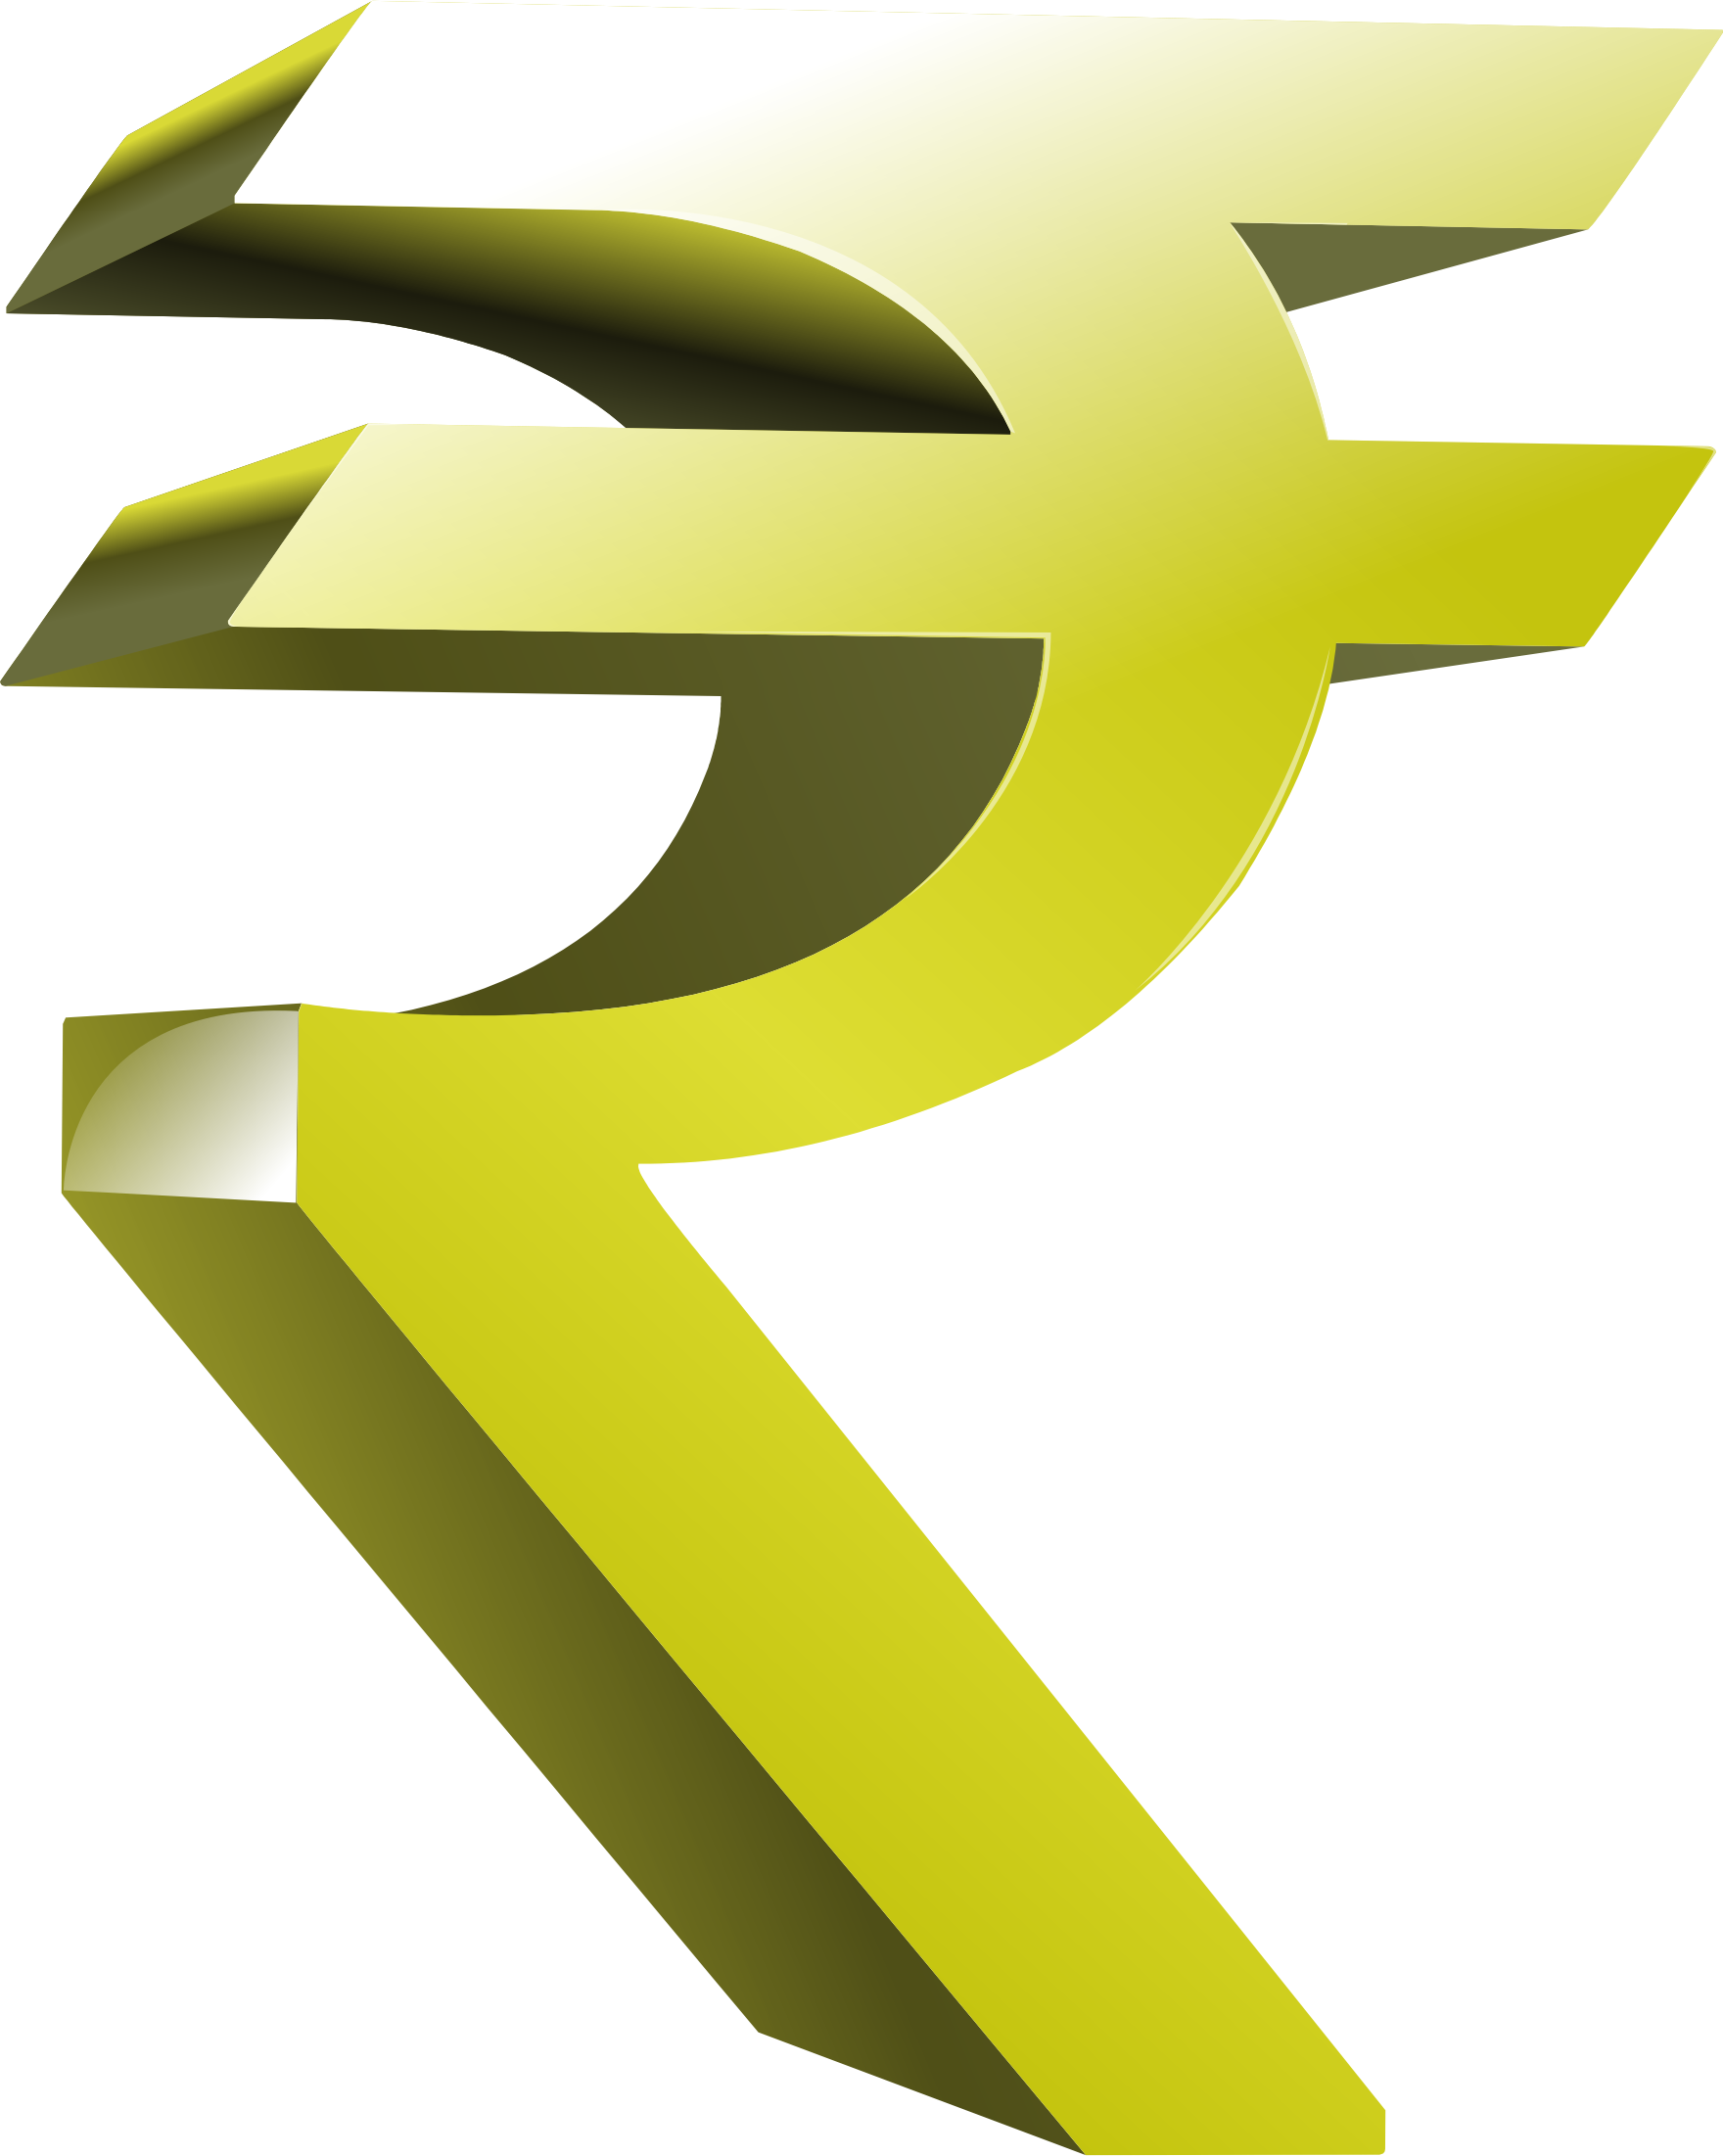 Golden Rupee Currency Icon Isolated 3d Gold Rupee Symbol With White  Background 3d Rendering Stock Photo - Download Image Now - iStock